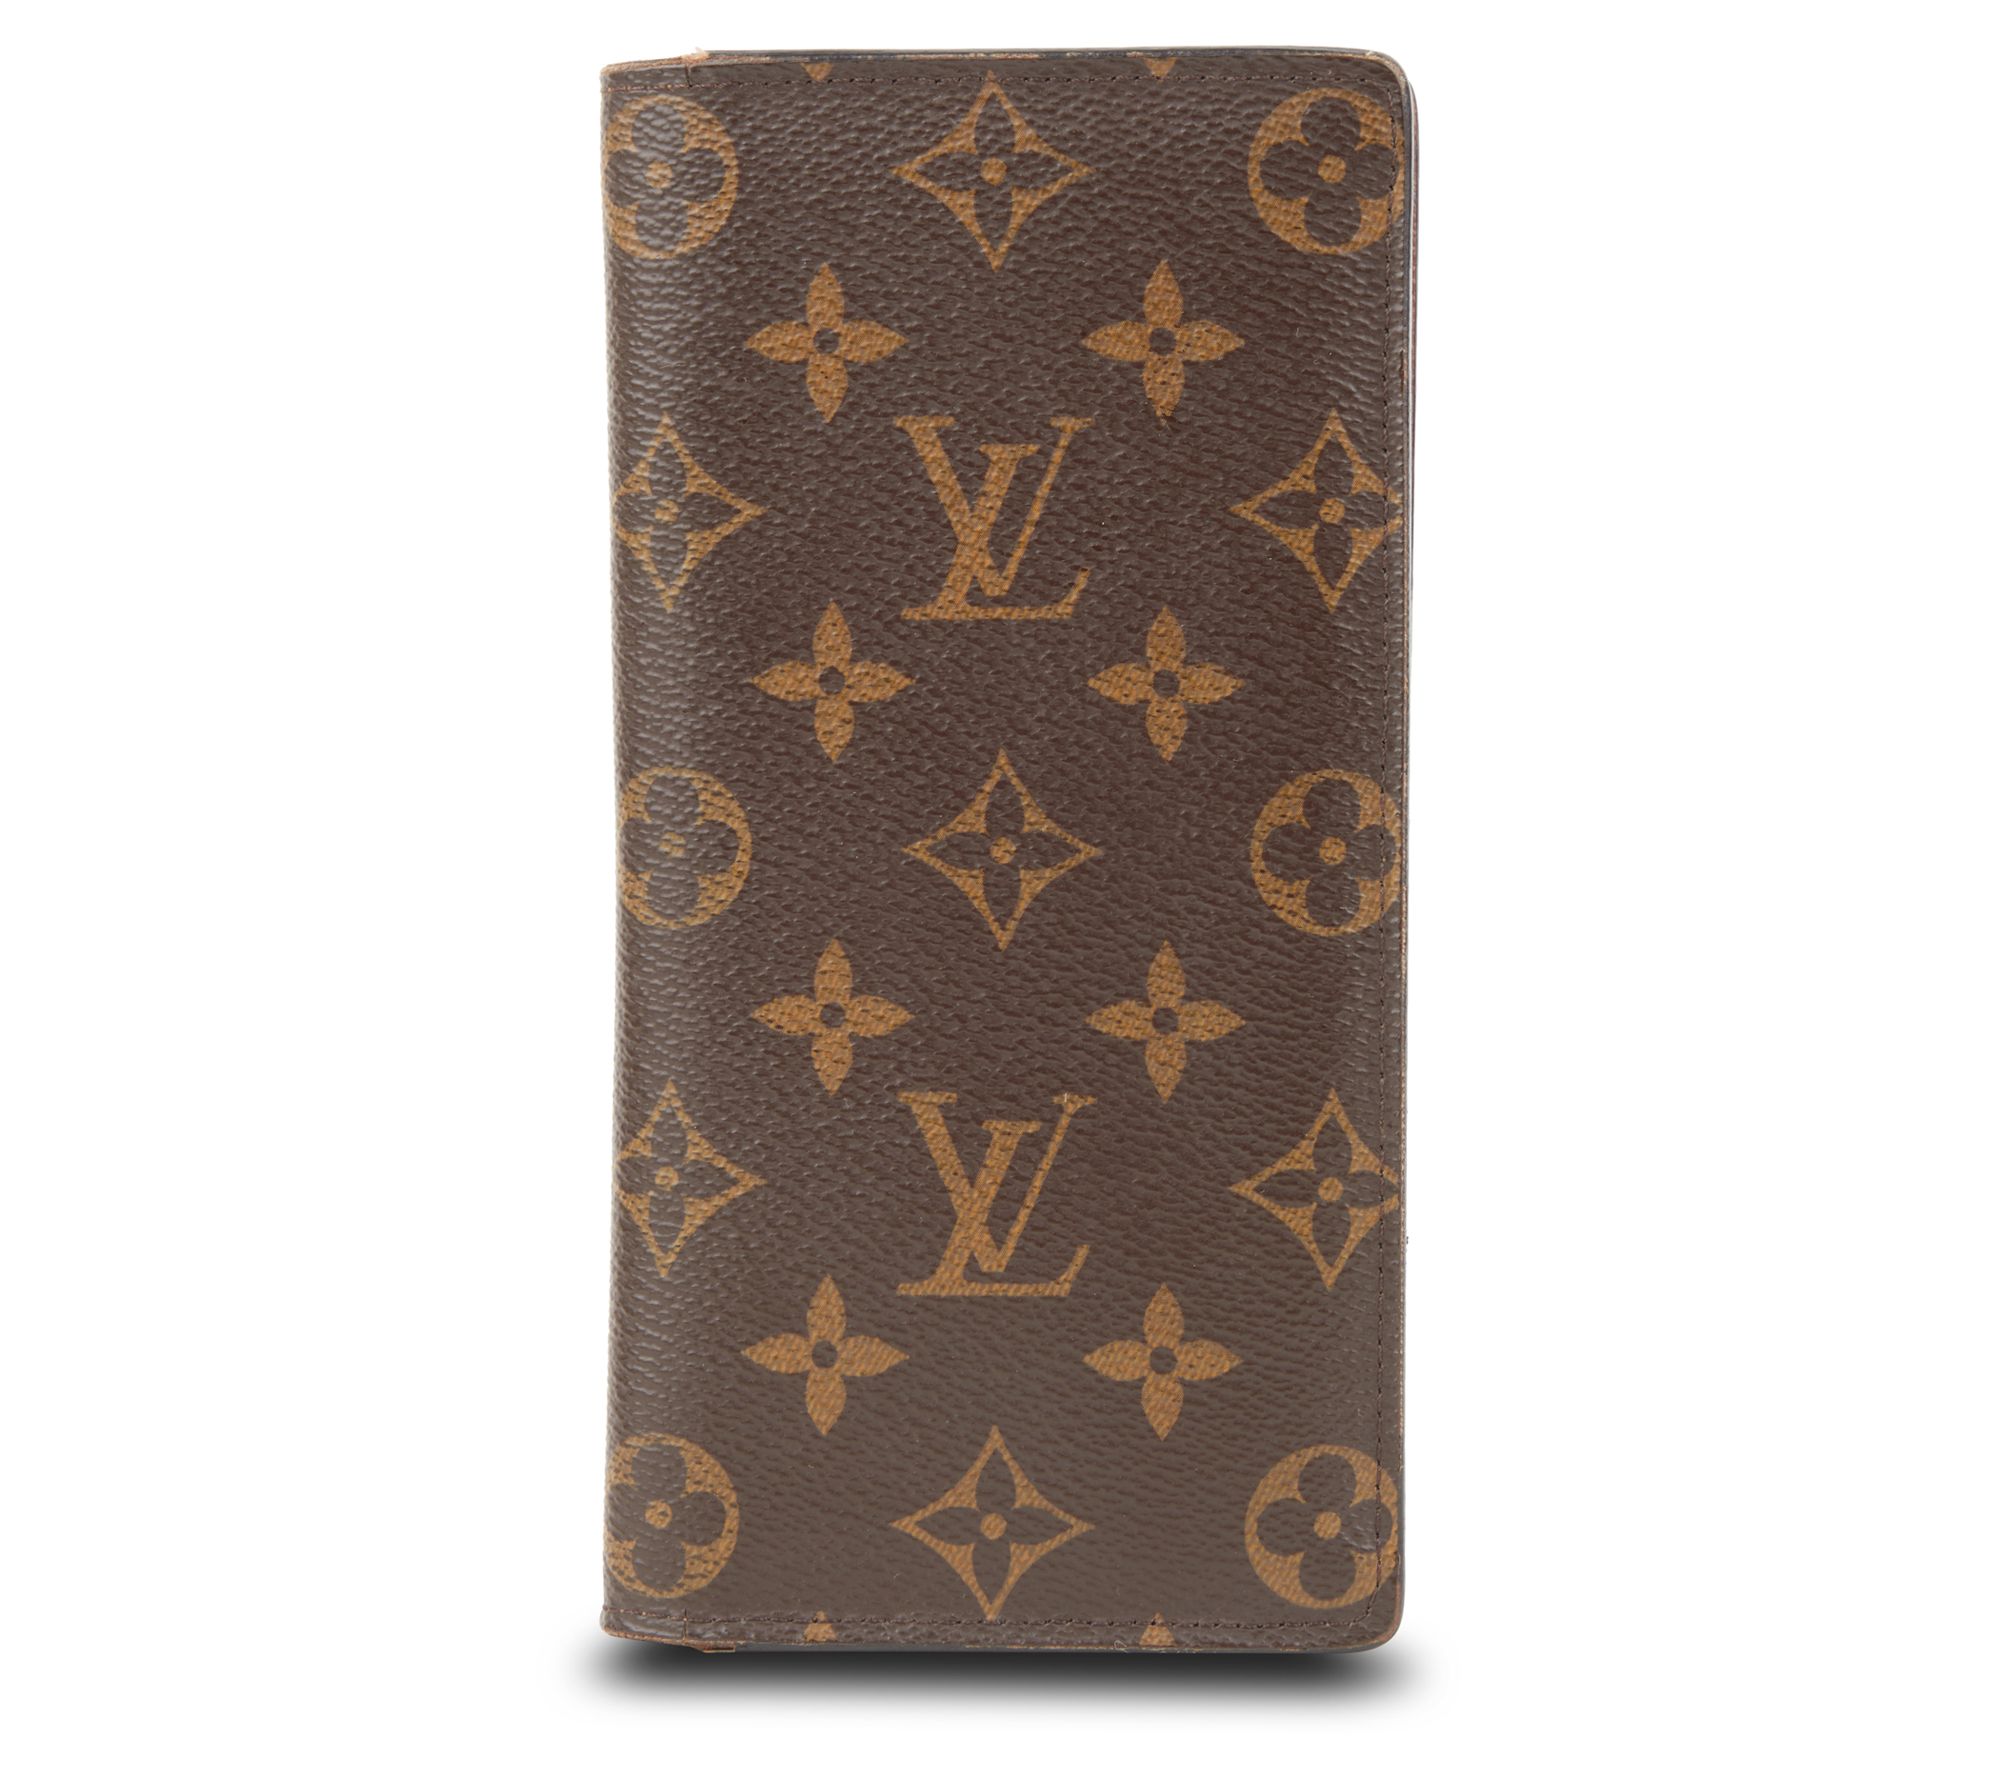 Louis Vuitton Capucines Leather Wallet (pre-owned) in Blue